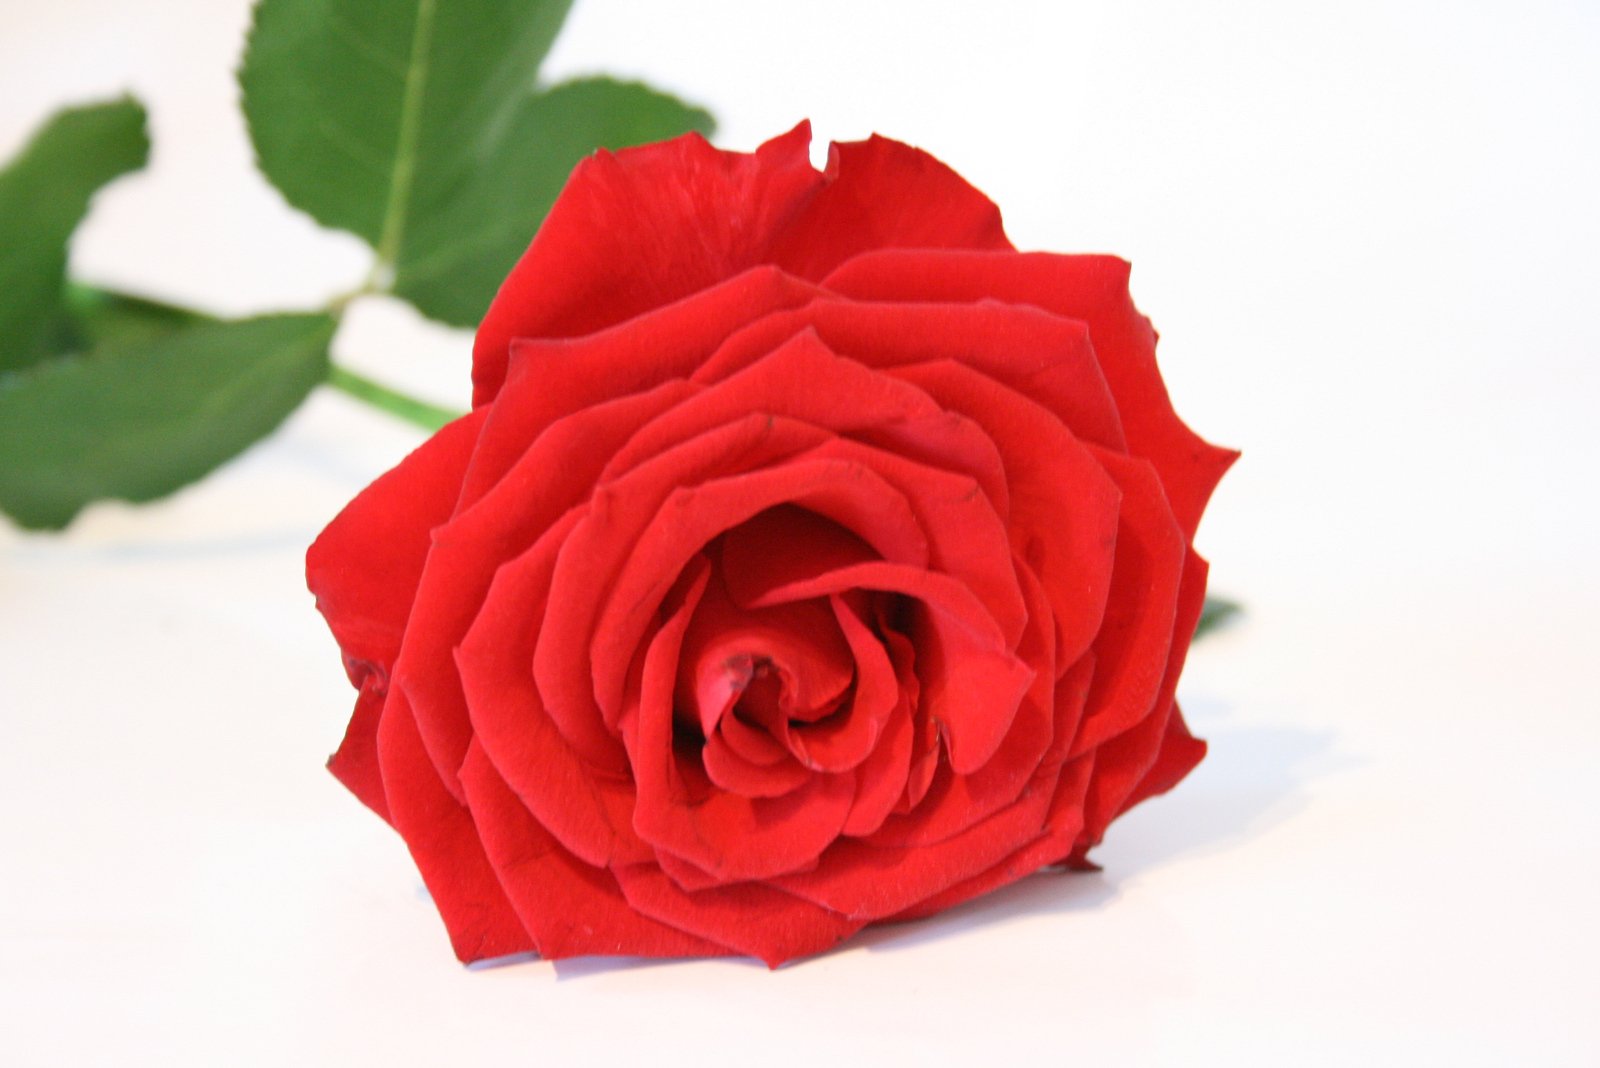 a red rose sits on a white surface